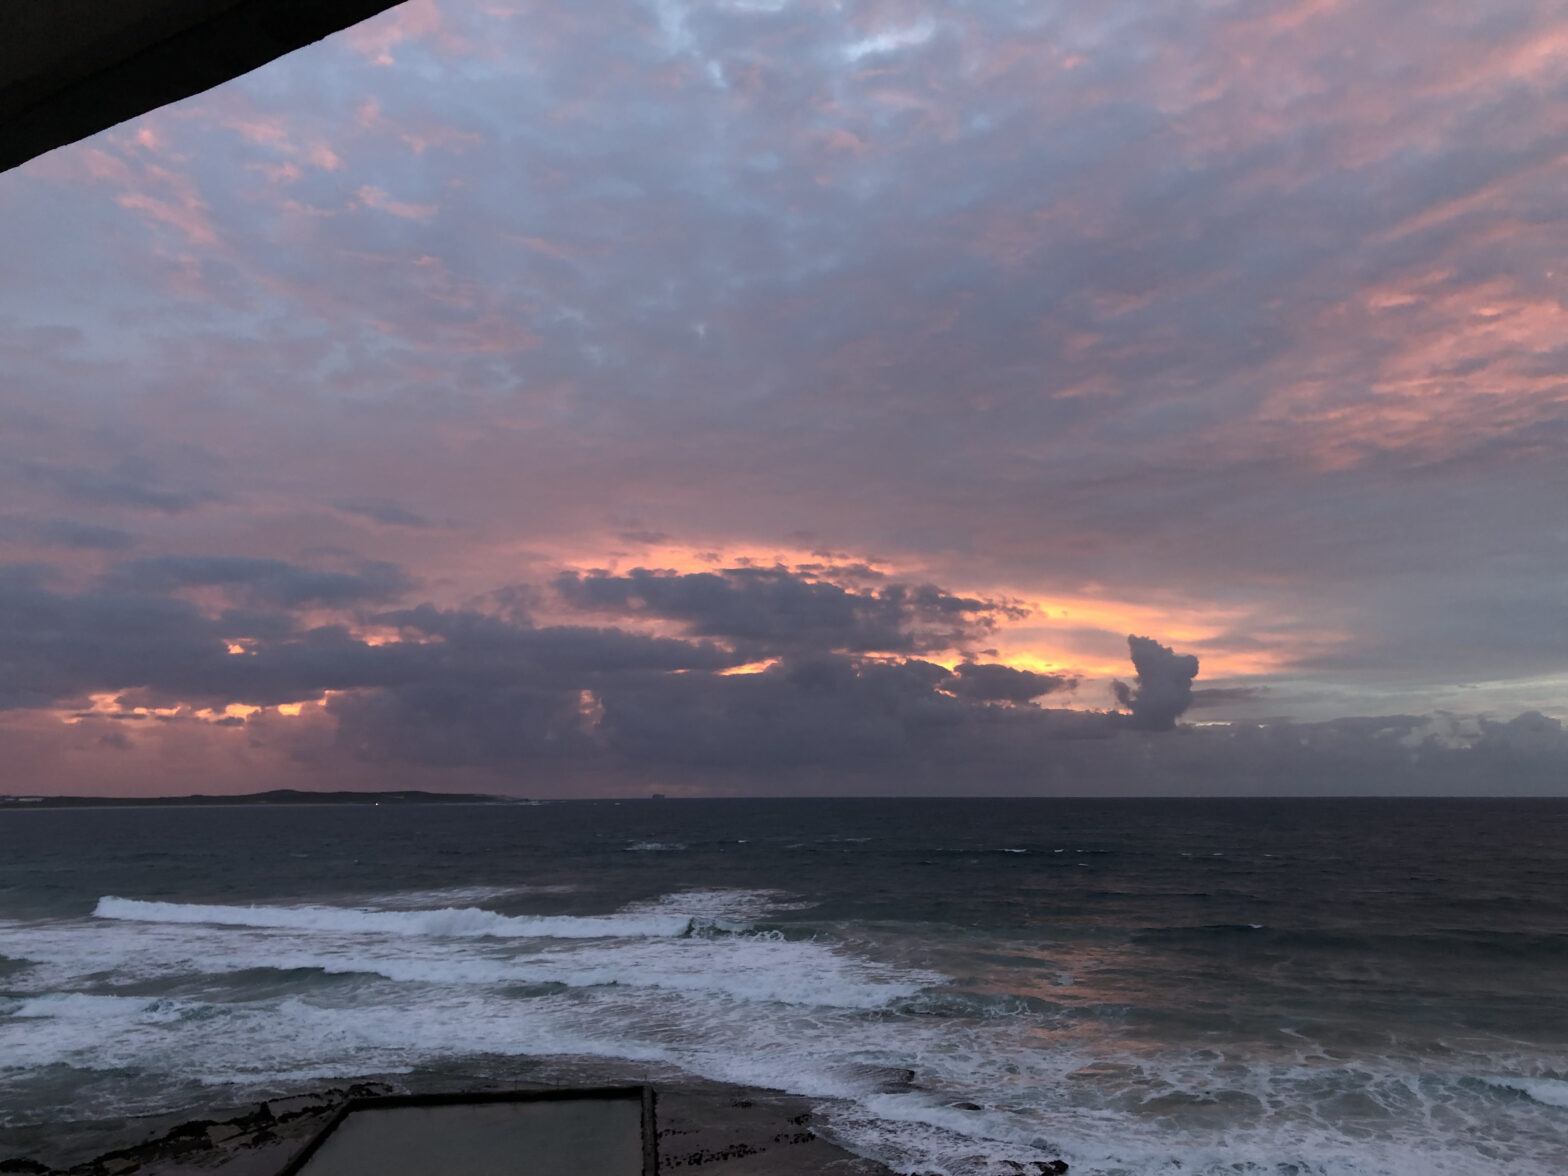 a cloudy, colorful sunrise over the smaller Cronulla ocean pool, which appears as a rectangle of black rock filled with still water, pointing towards the horizon. Beyond is the white water of breaking waves, and dark blue water in the pre-dawn light